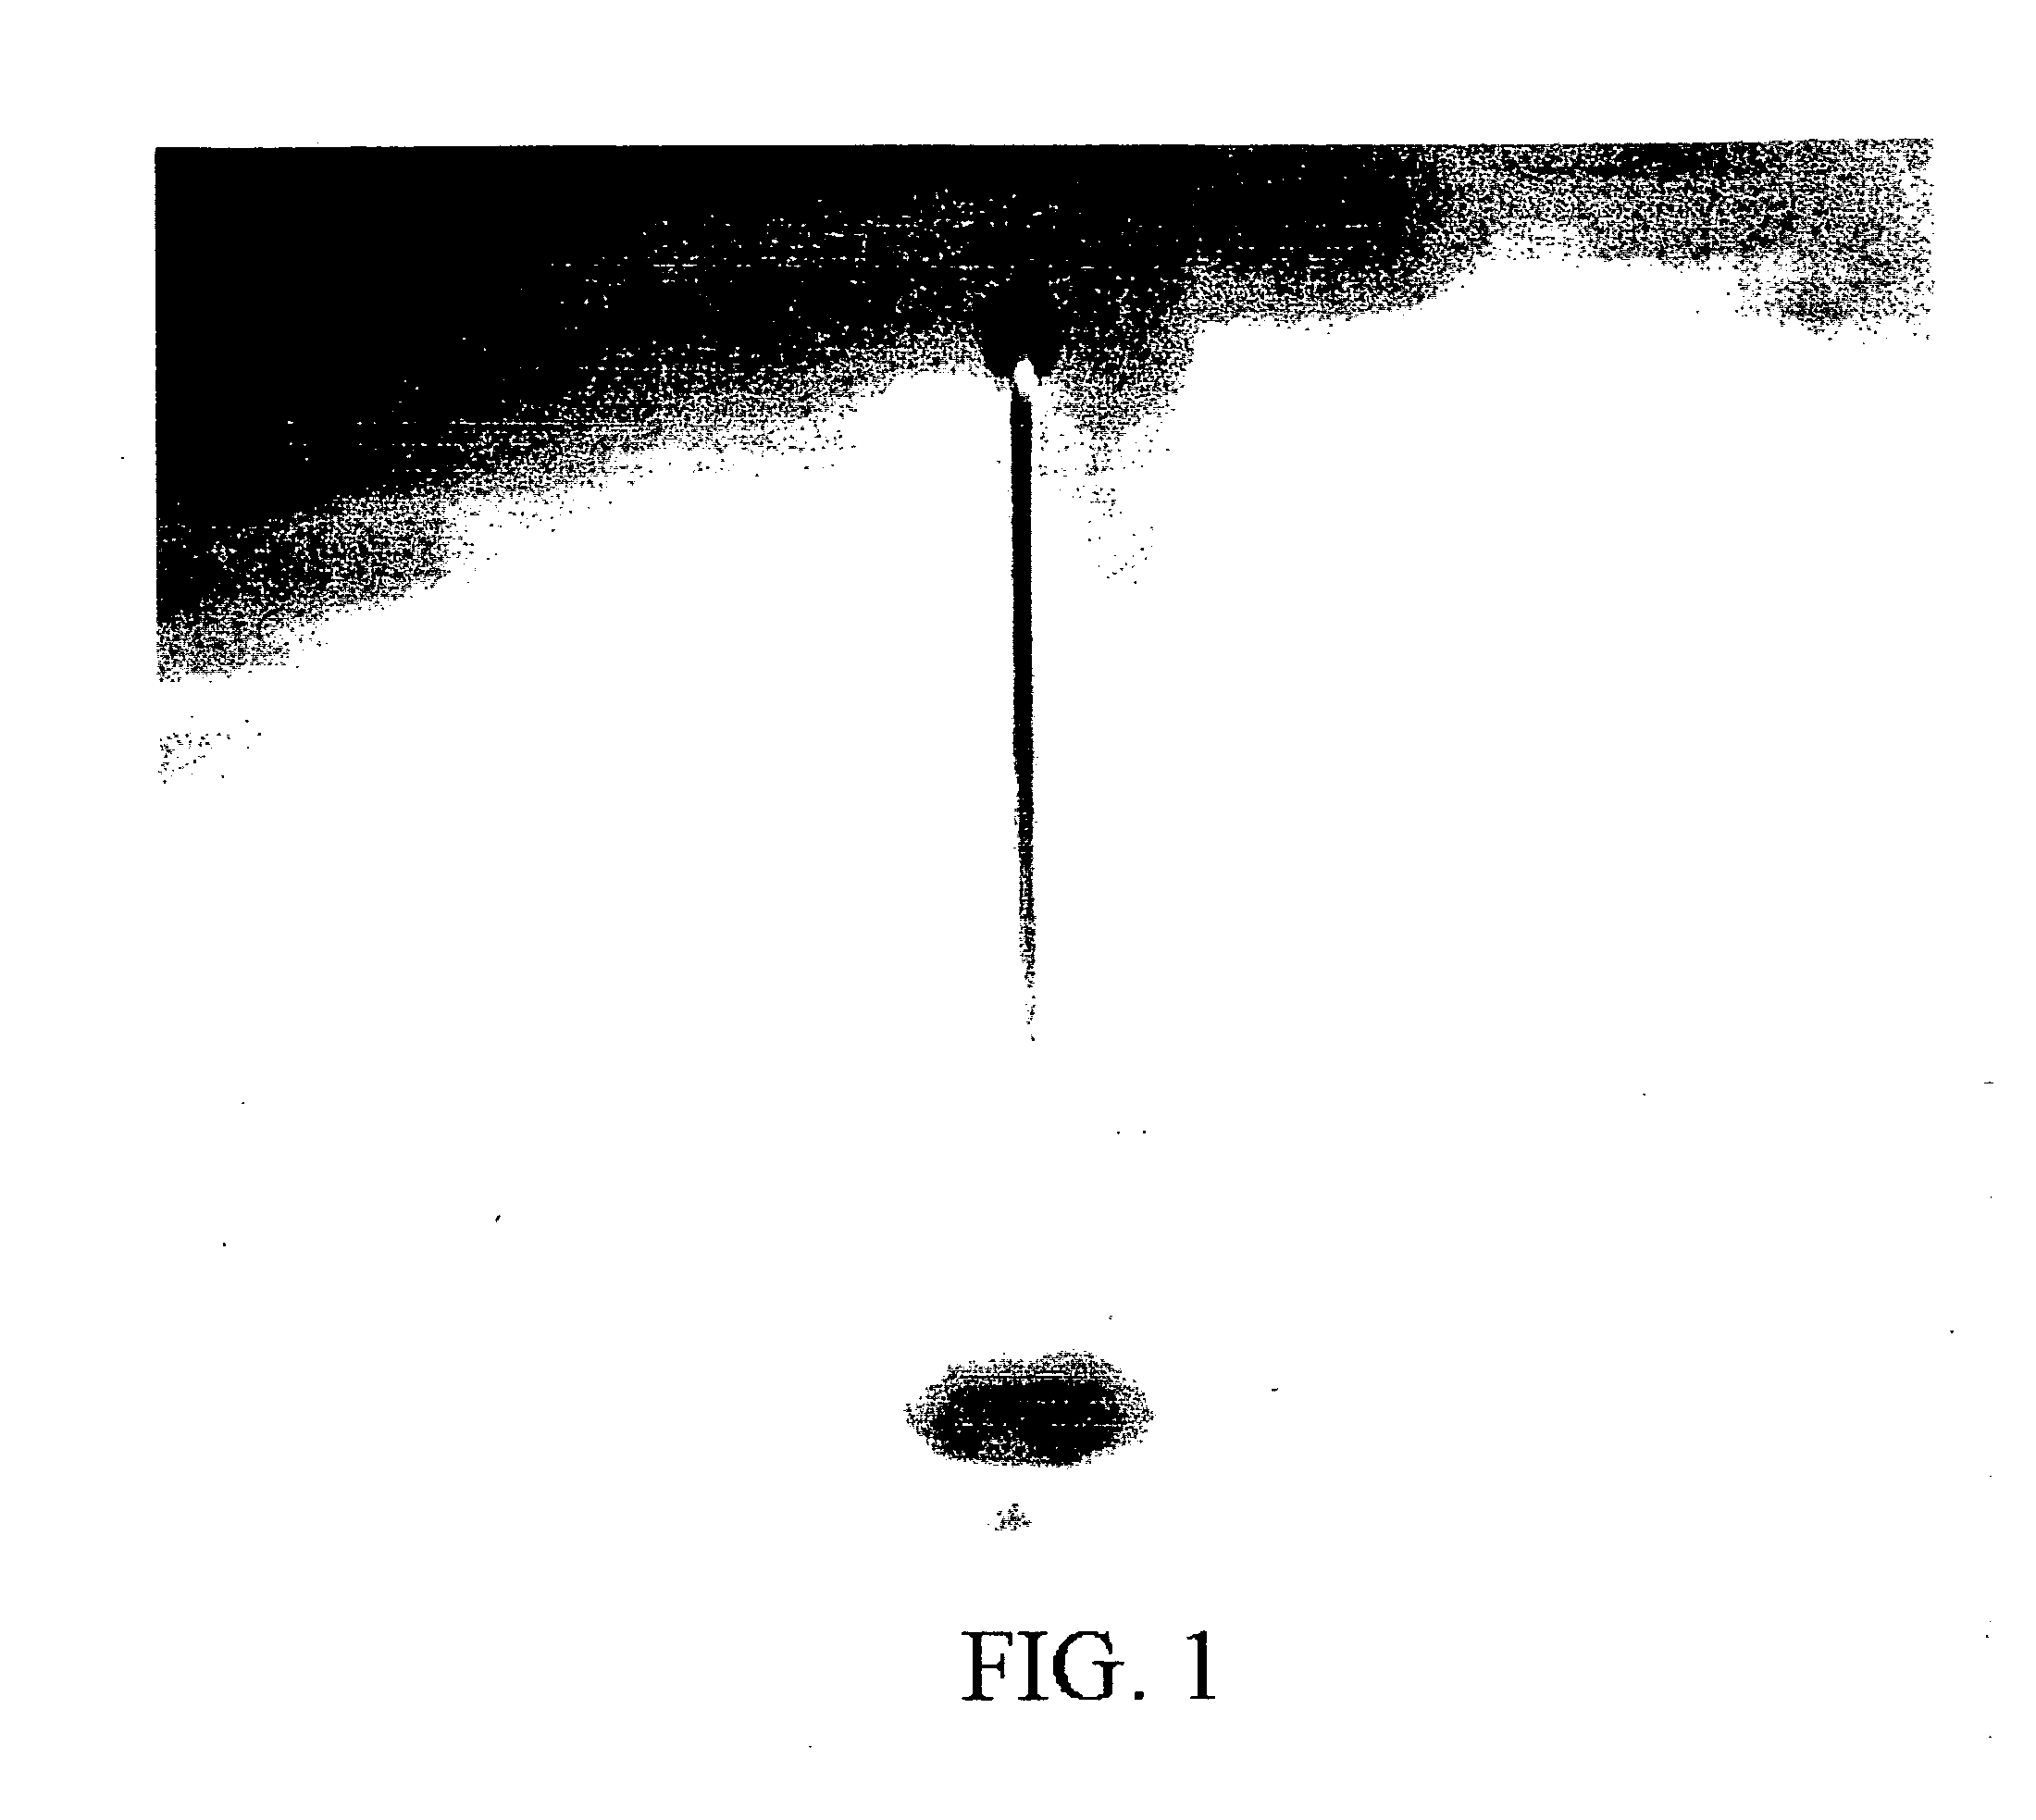 Photocurable pigment type inkjet ink composition